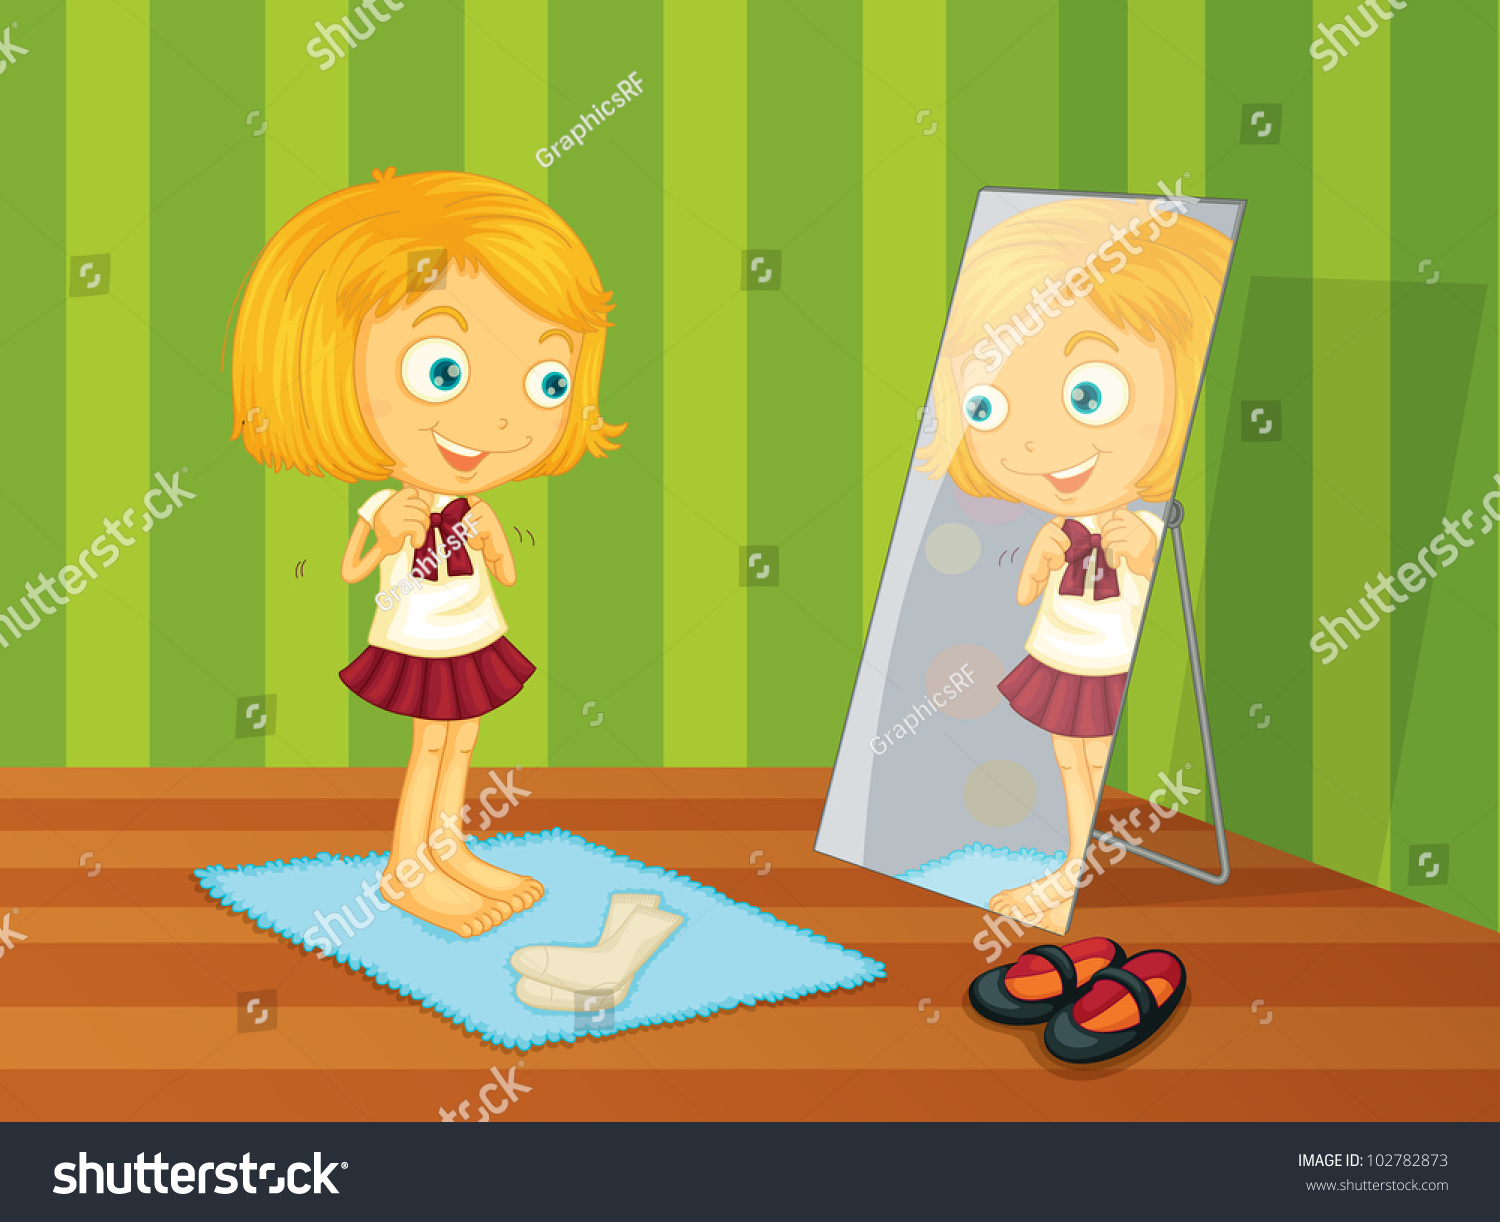 Illustration Of Girl Looking Into Mirror - Eps Vector Format Also ...